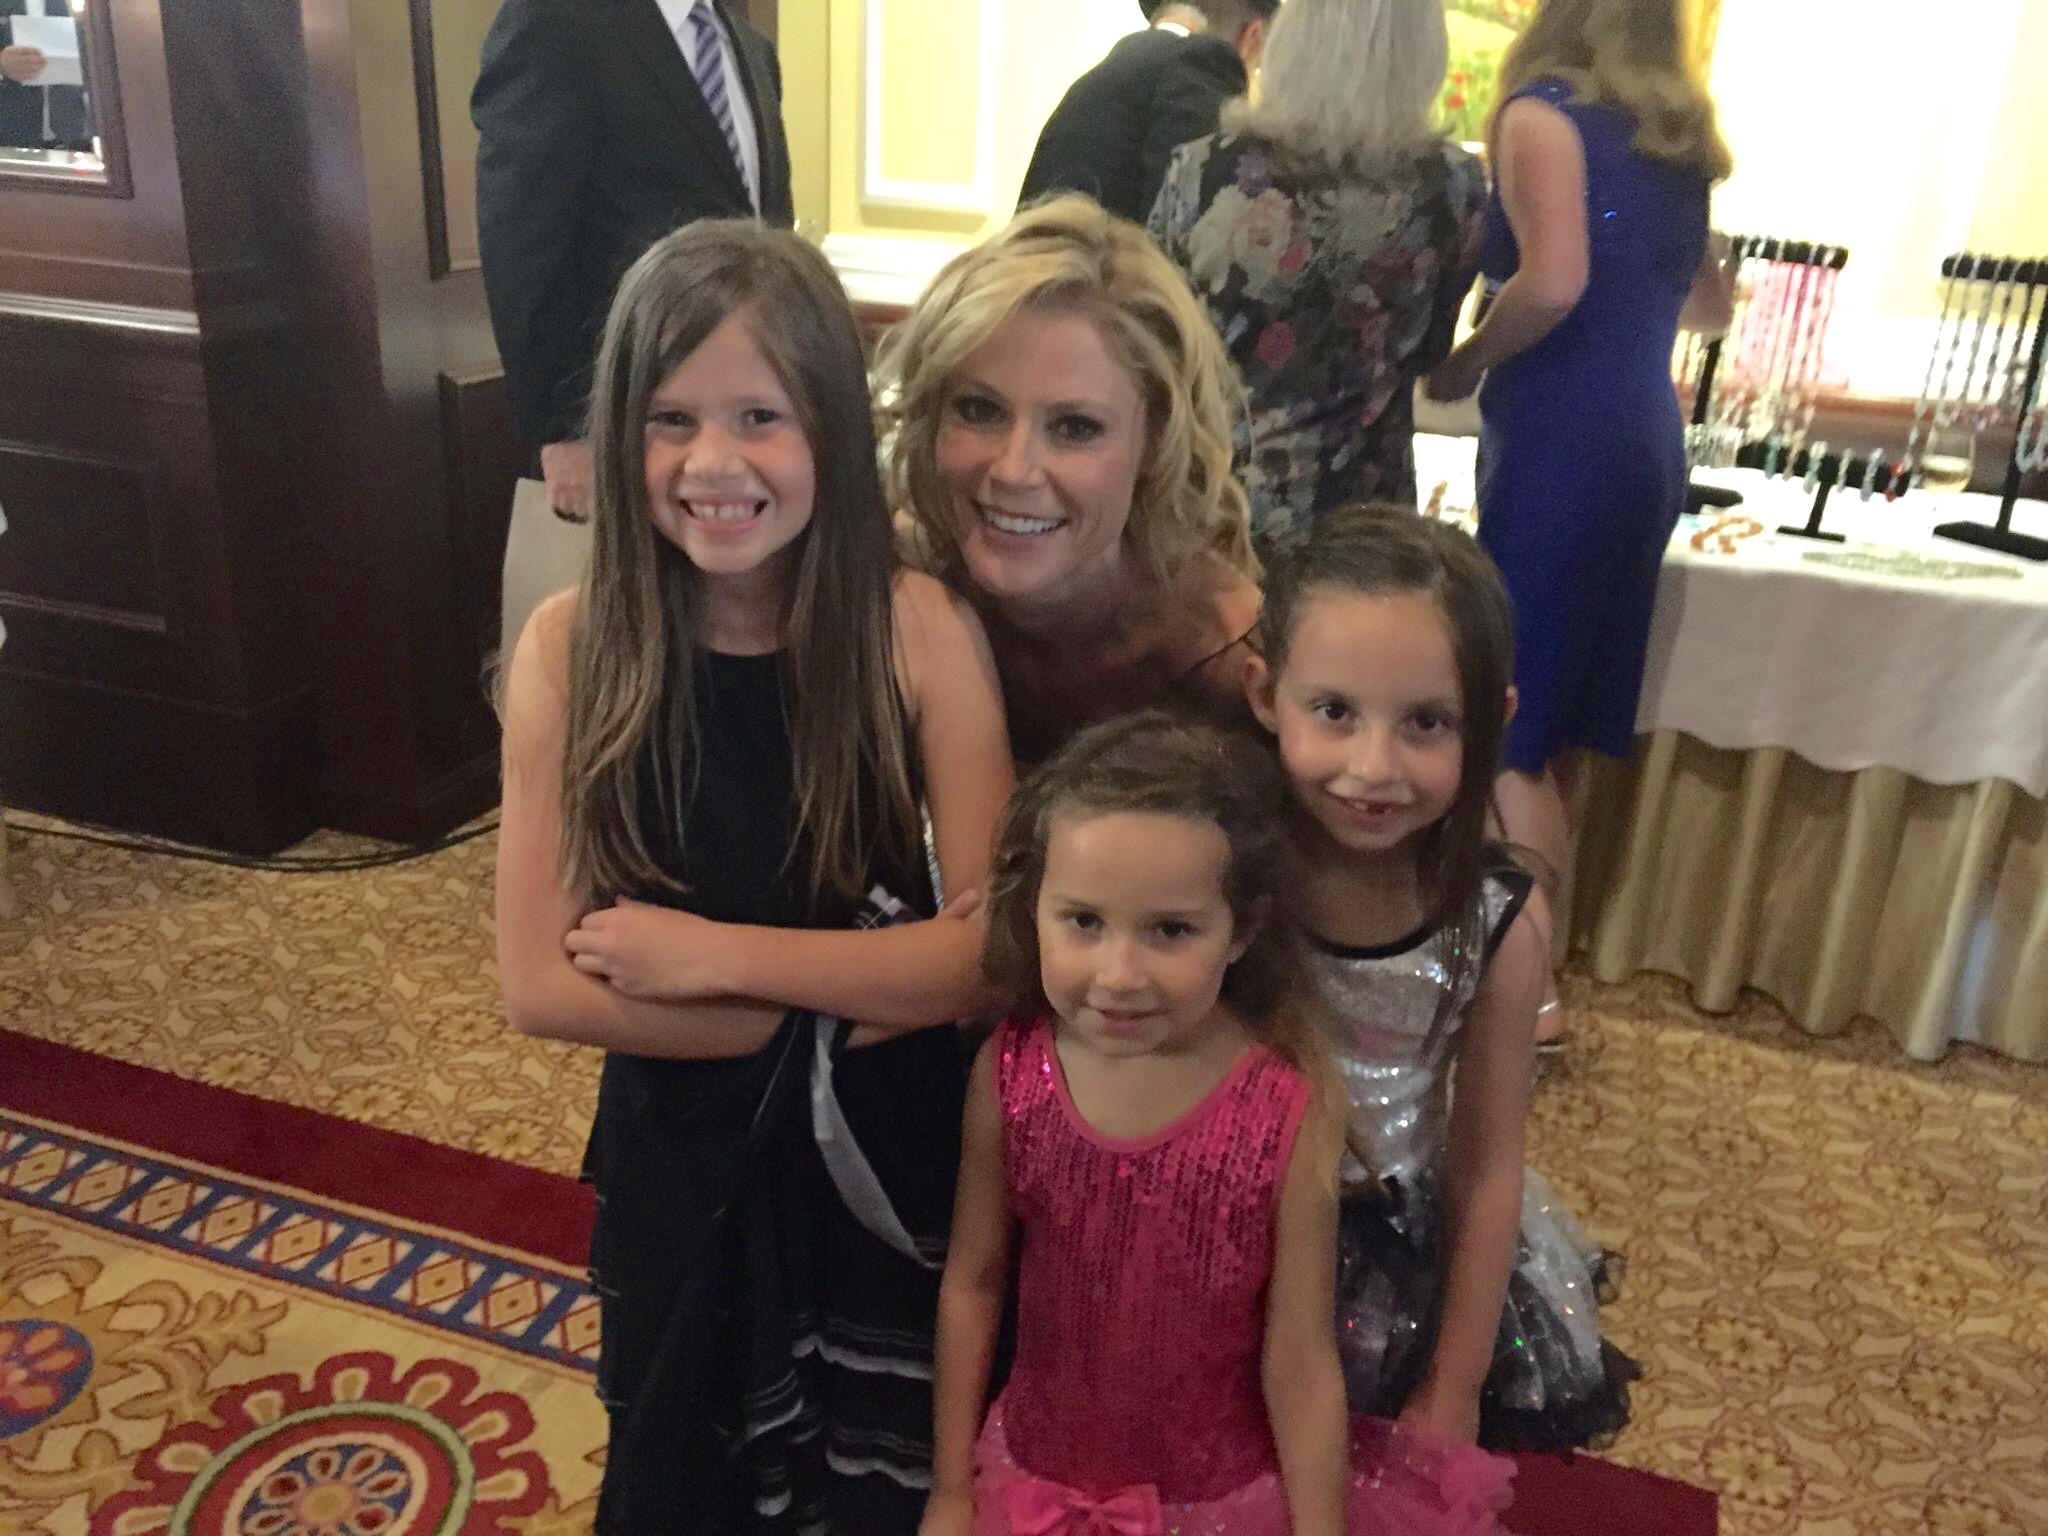 Sofie with Julie Bowen from Modern Family, her sister Shea and her friend Avery.